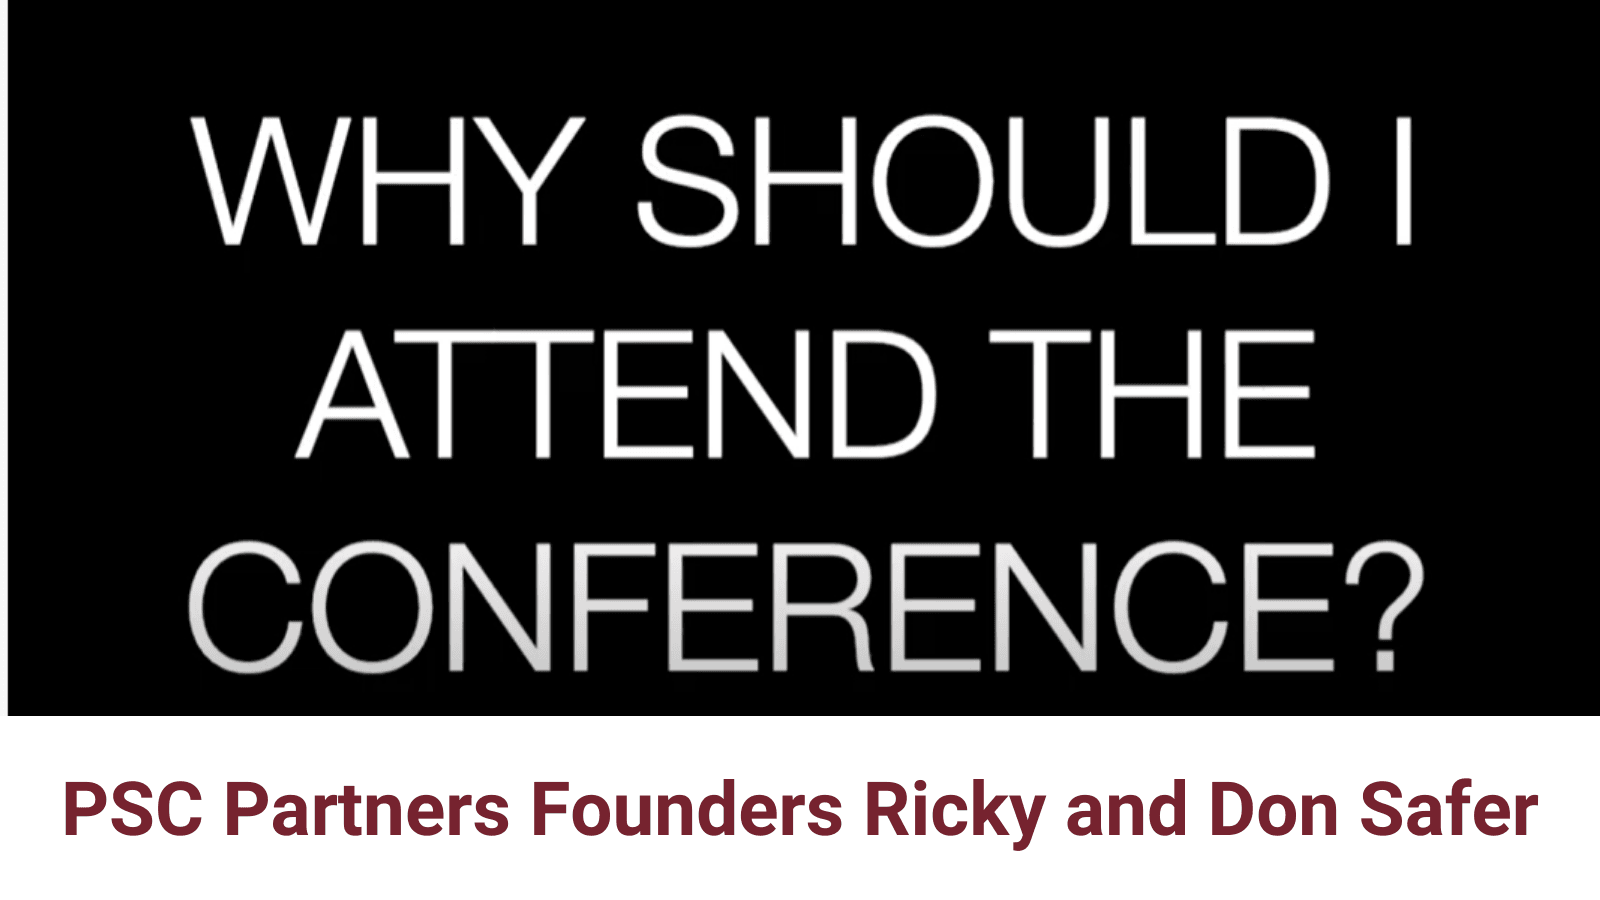 Why should I attend the Conference?